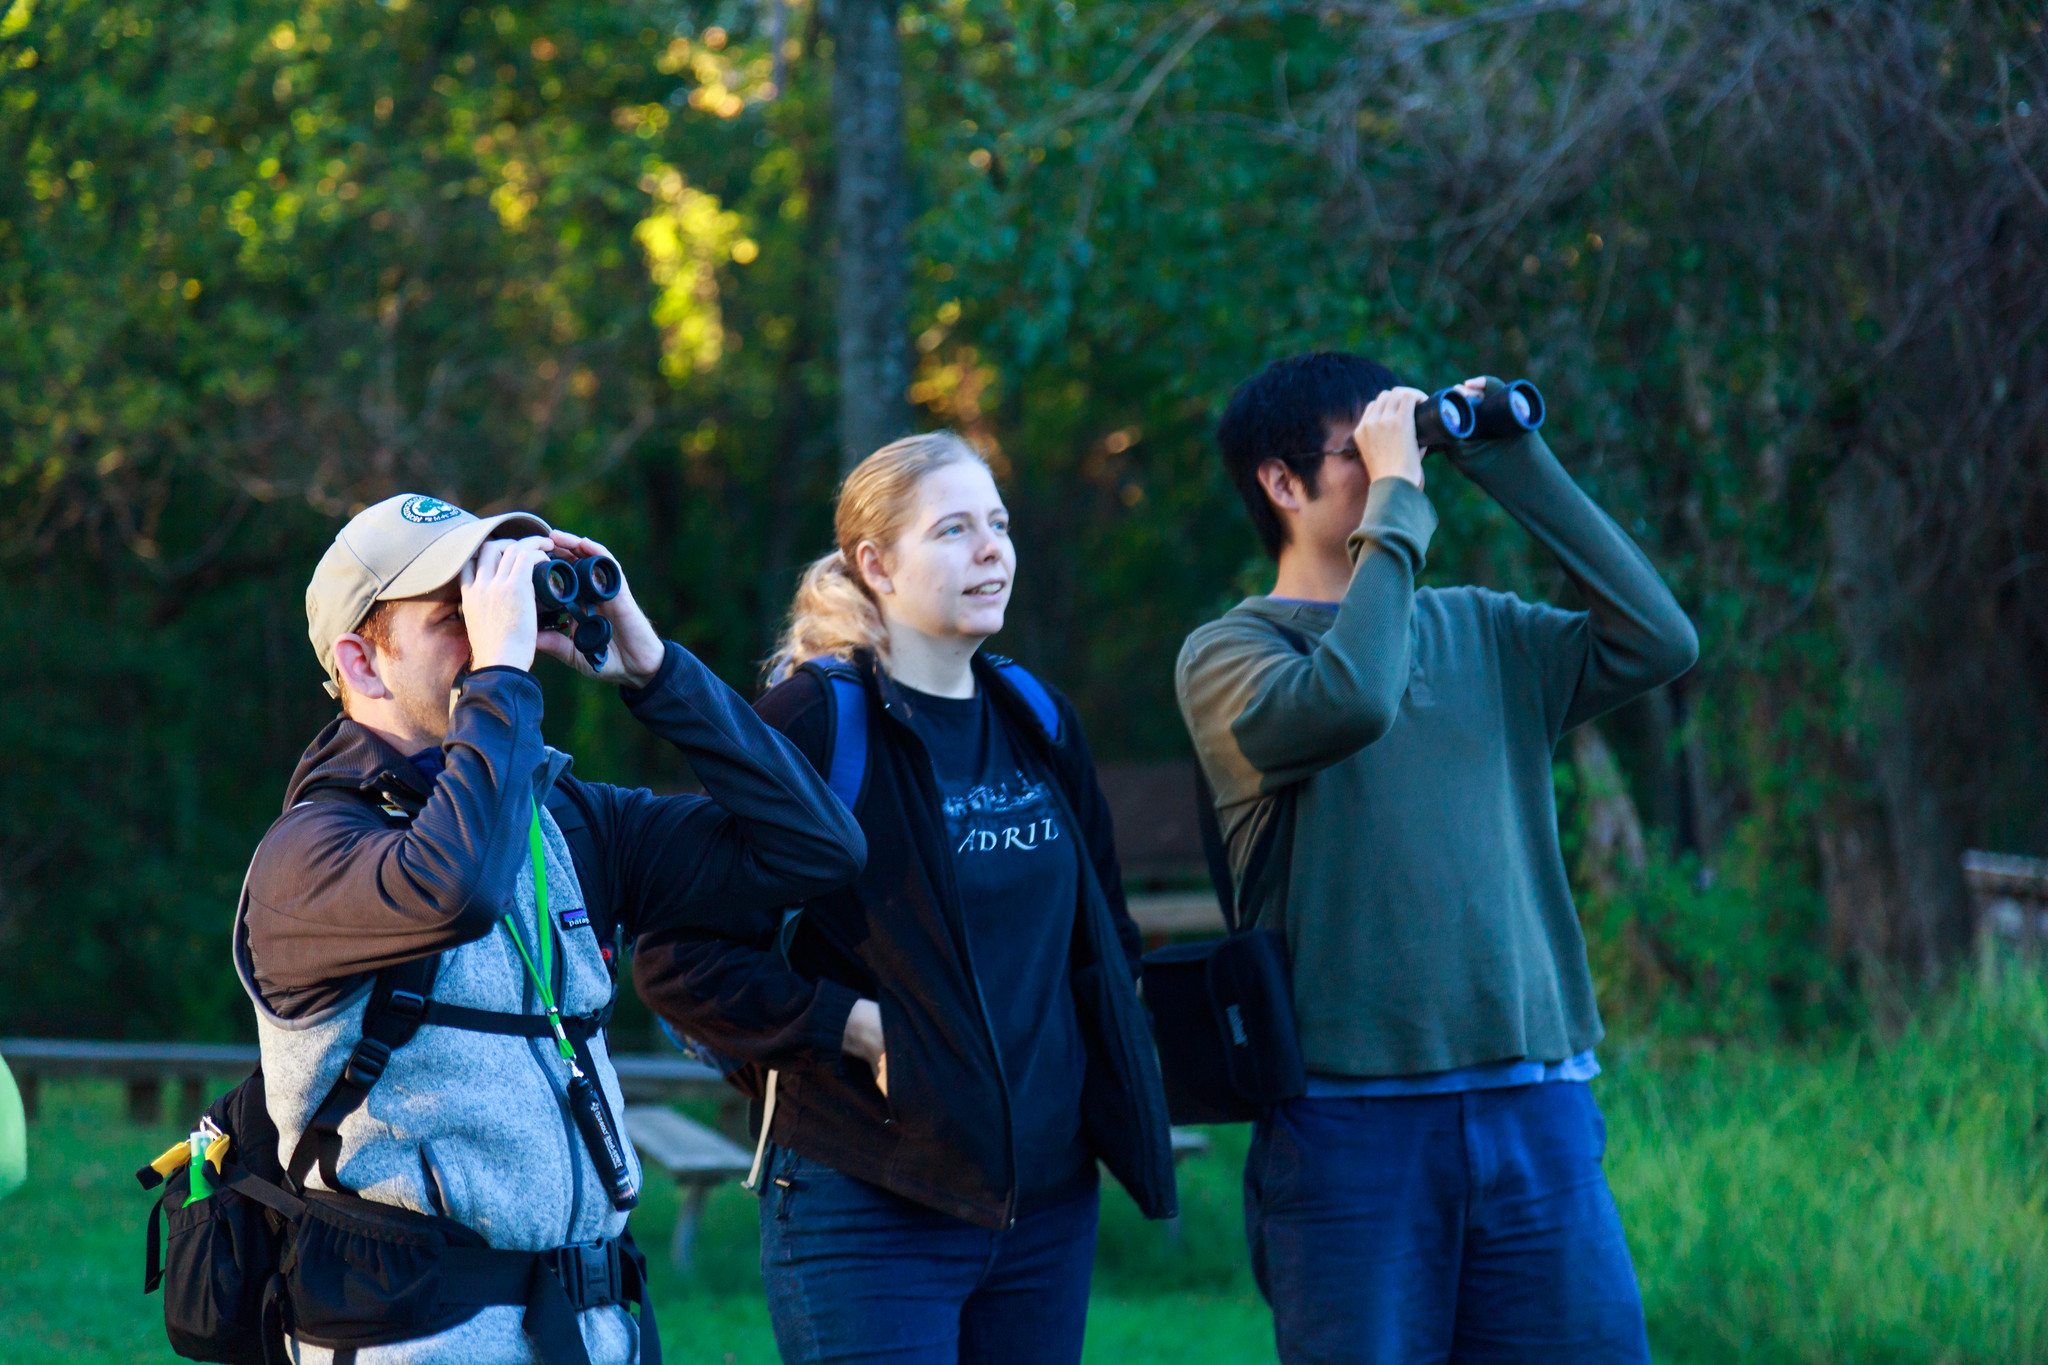 A group of people birding and looking through binoculars